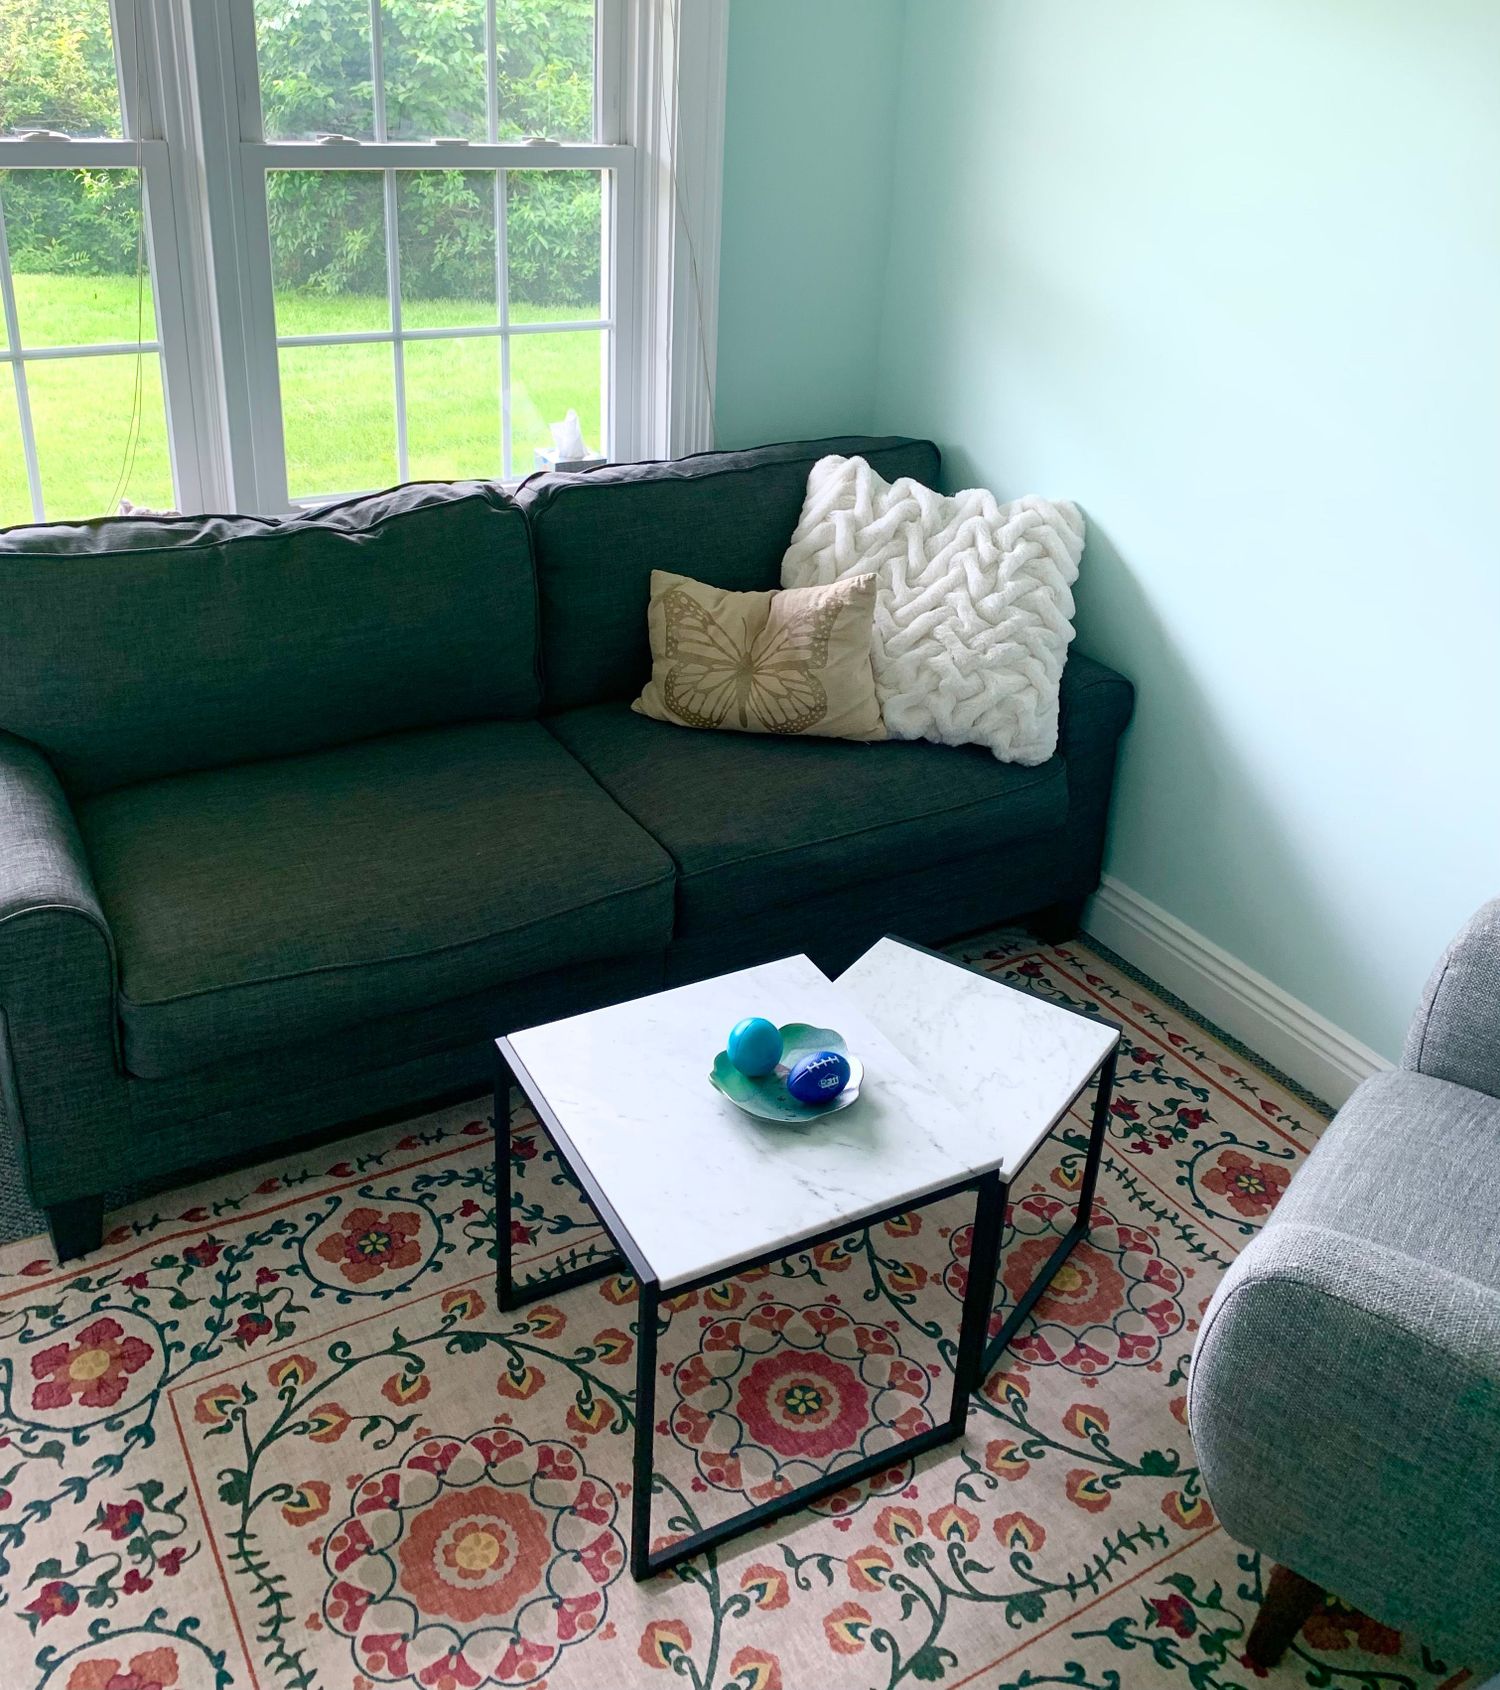 Gallery Photo of Welcome to my office! Sessions include traditional talk therapy, art therapy, and there are even a few therapy games if you are nervous.